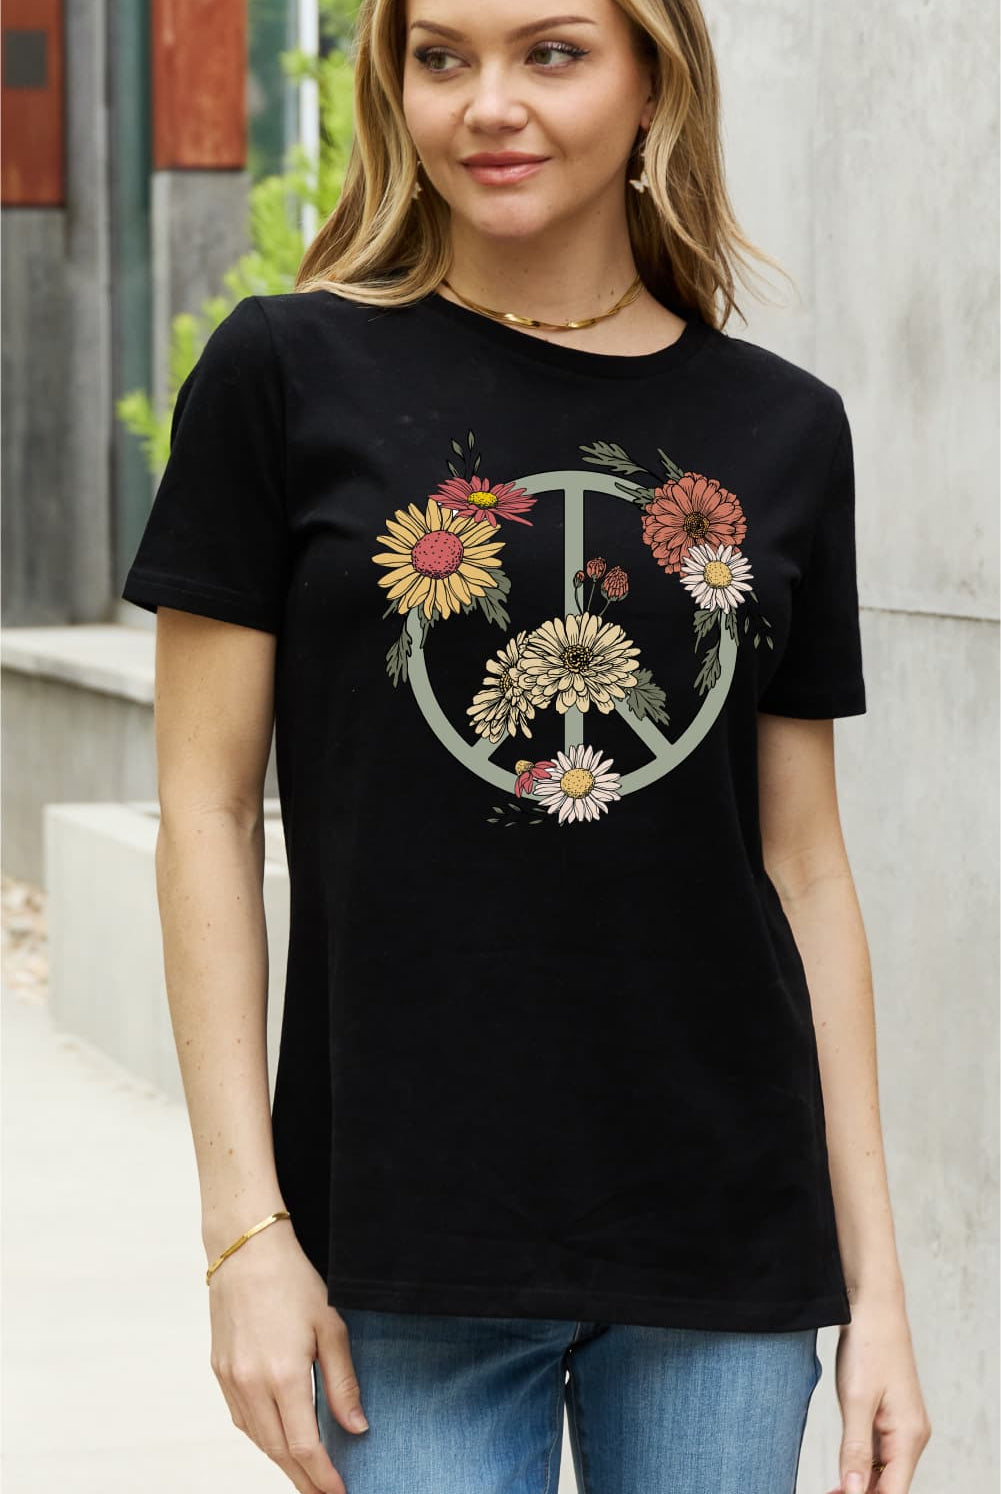 Gray Simply Love Full Size Flower Graphic Cotton Tee Tops